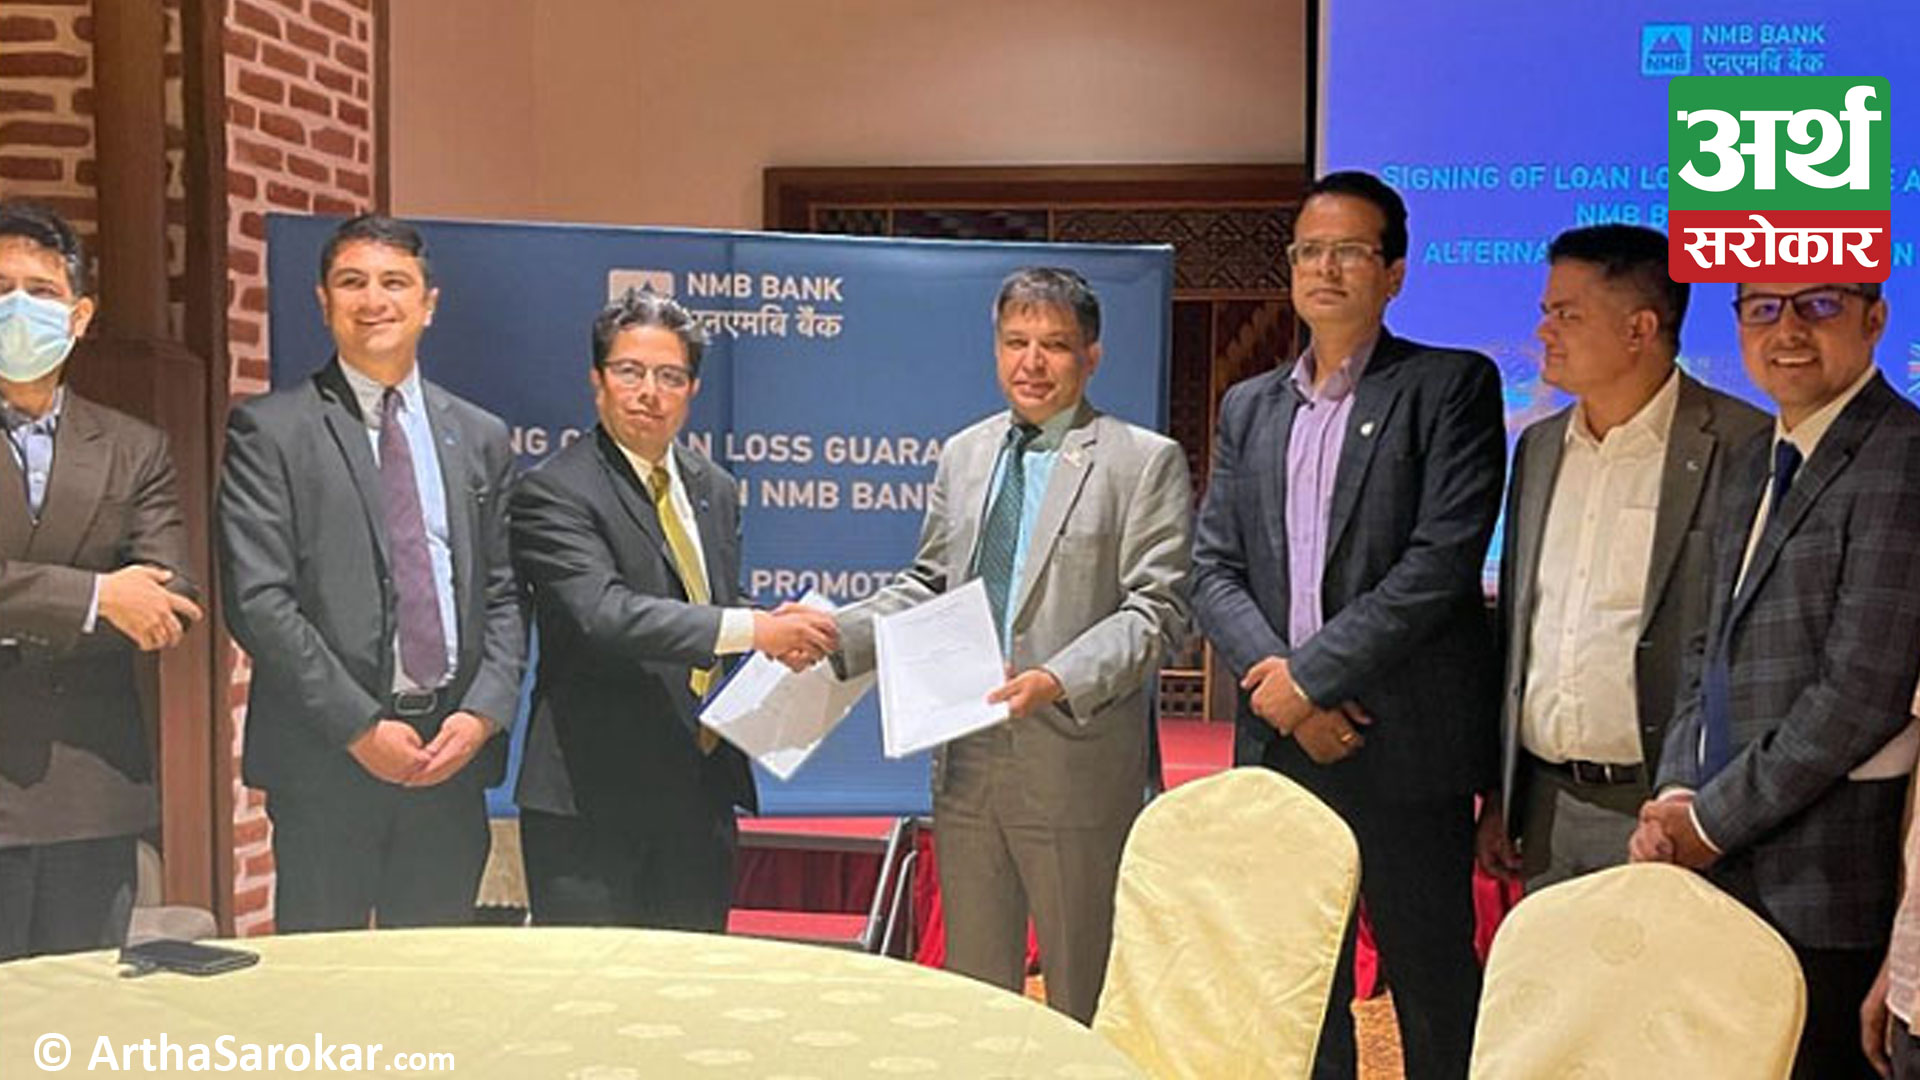 NMB Bank signs agreement with Alternative Energy Promotion Centre for loan loss guarantee under sustainable energy challenge fund